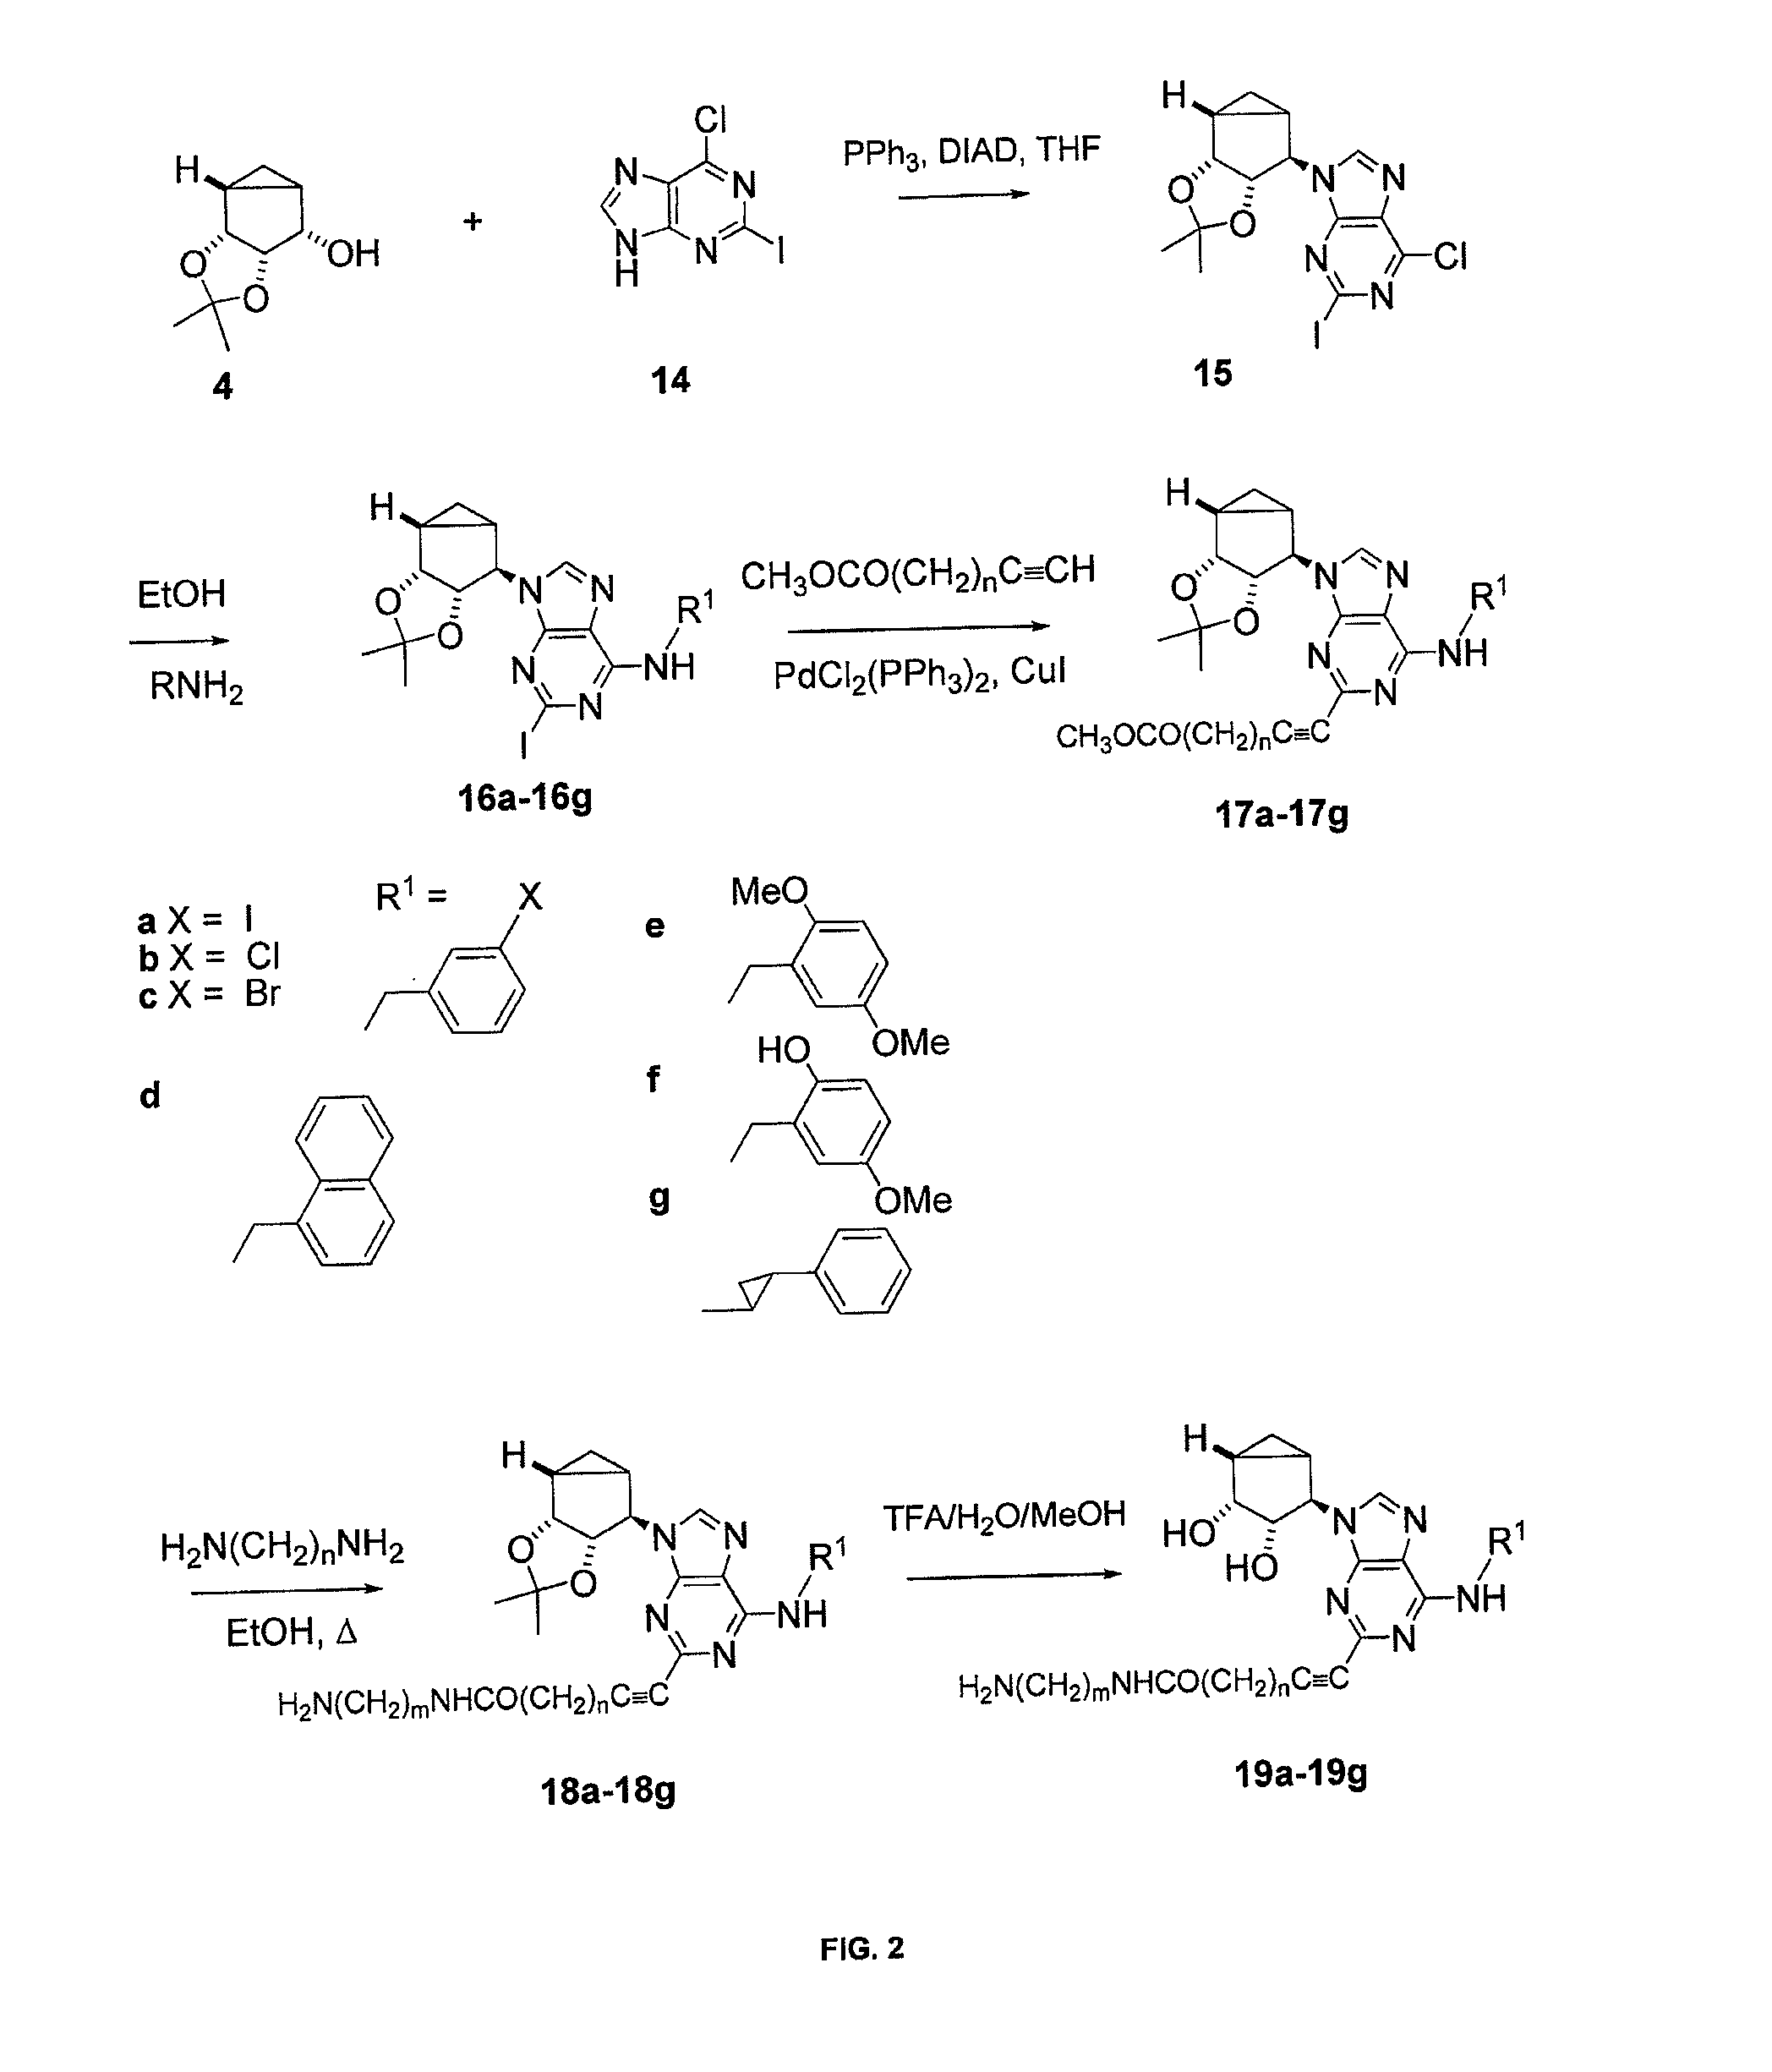 A3 adenosine receptor antagonists and partial agonists